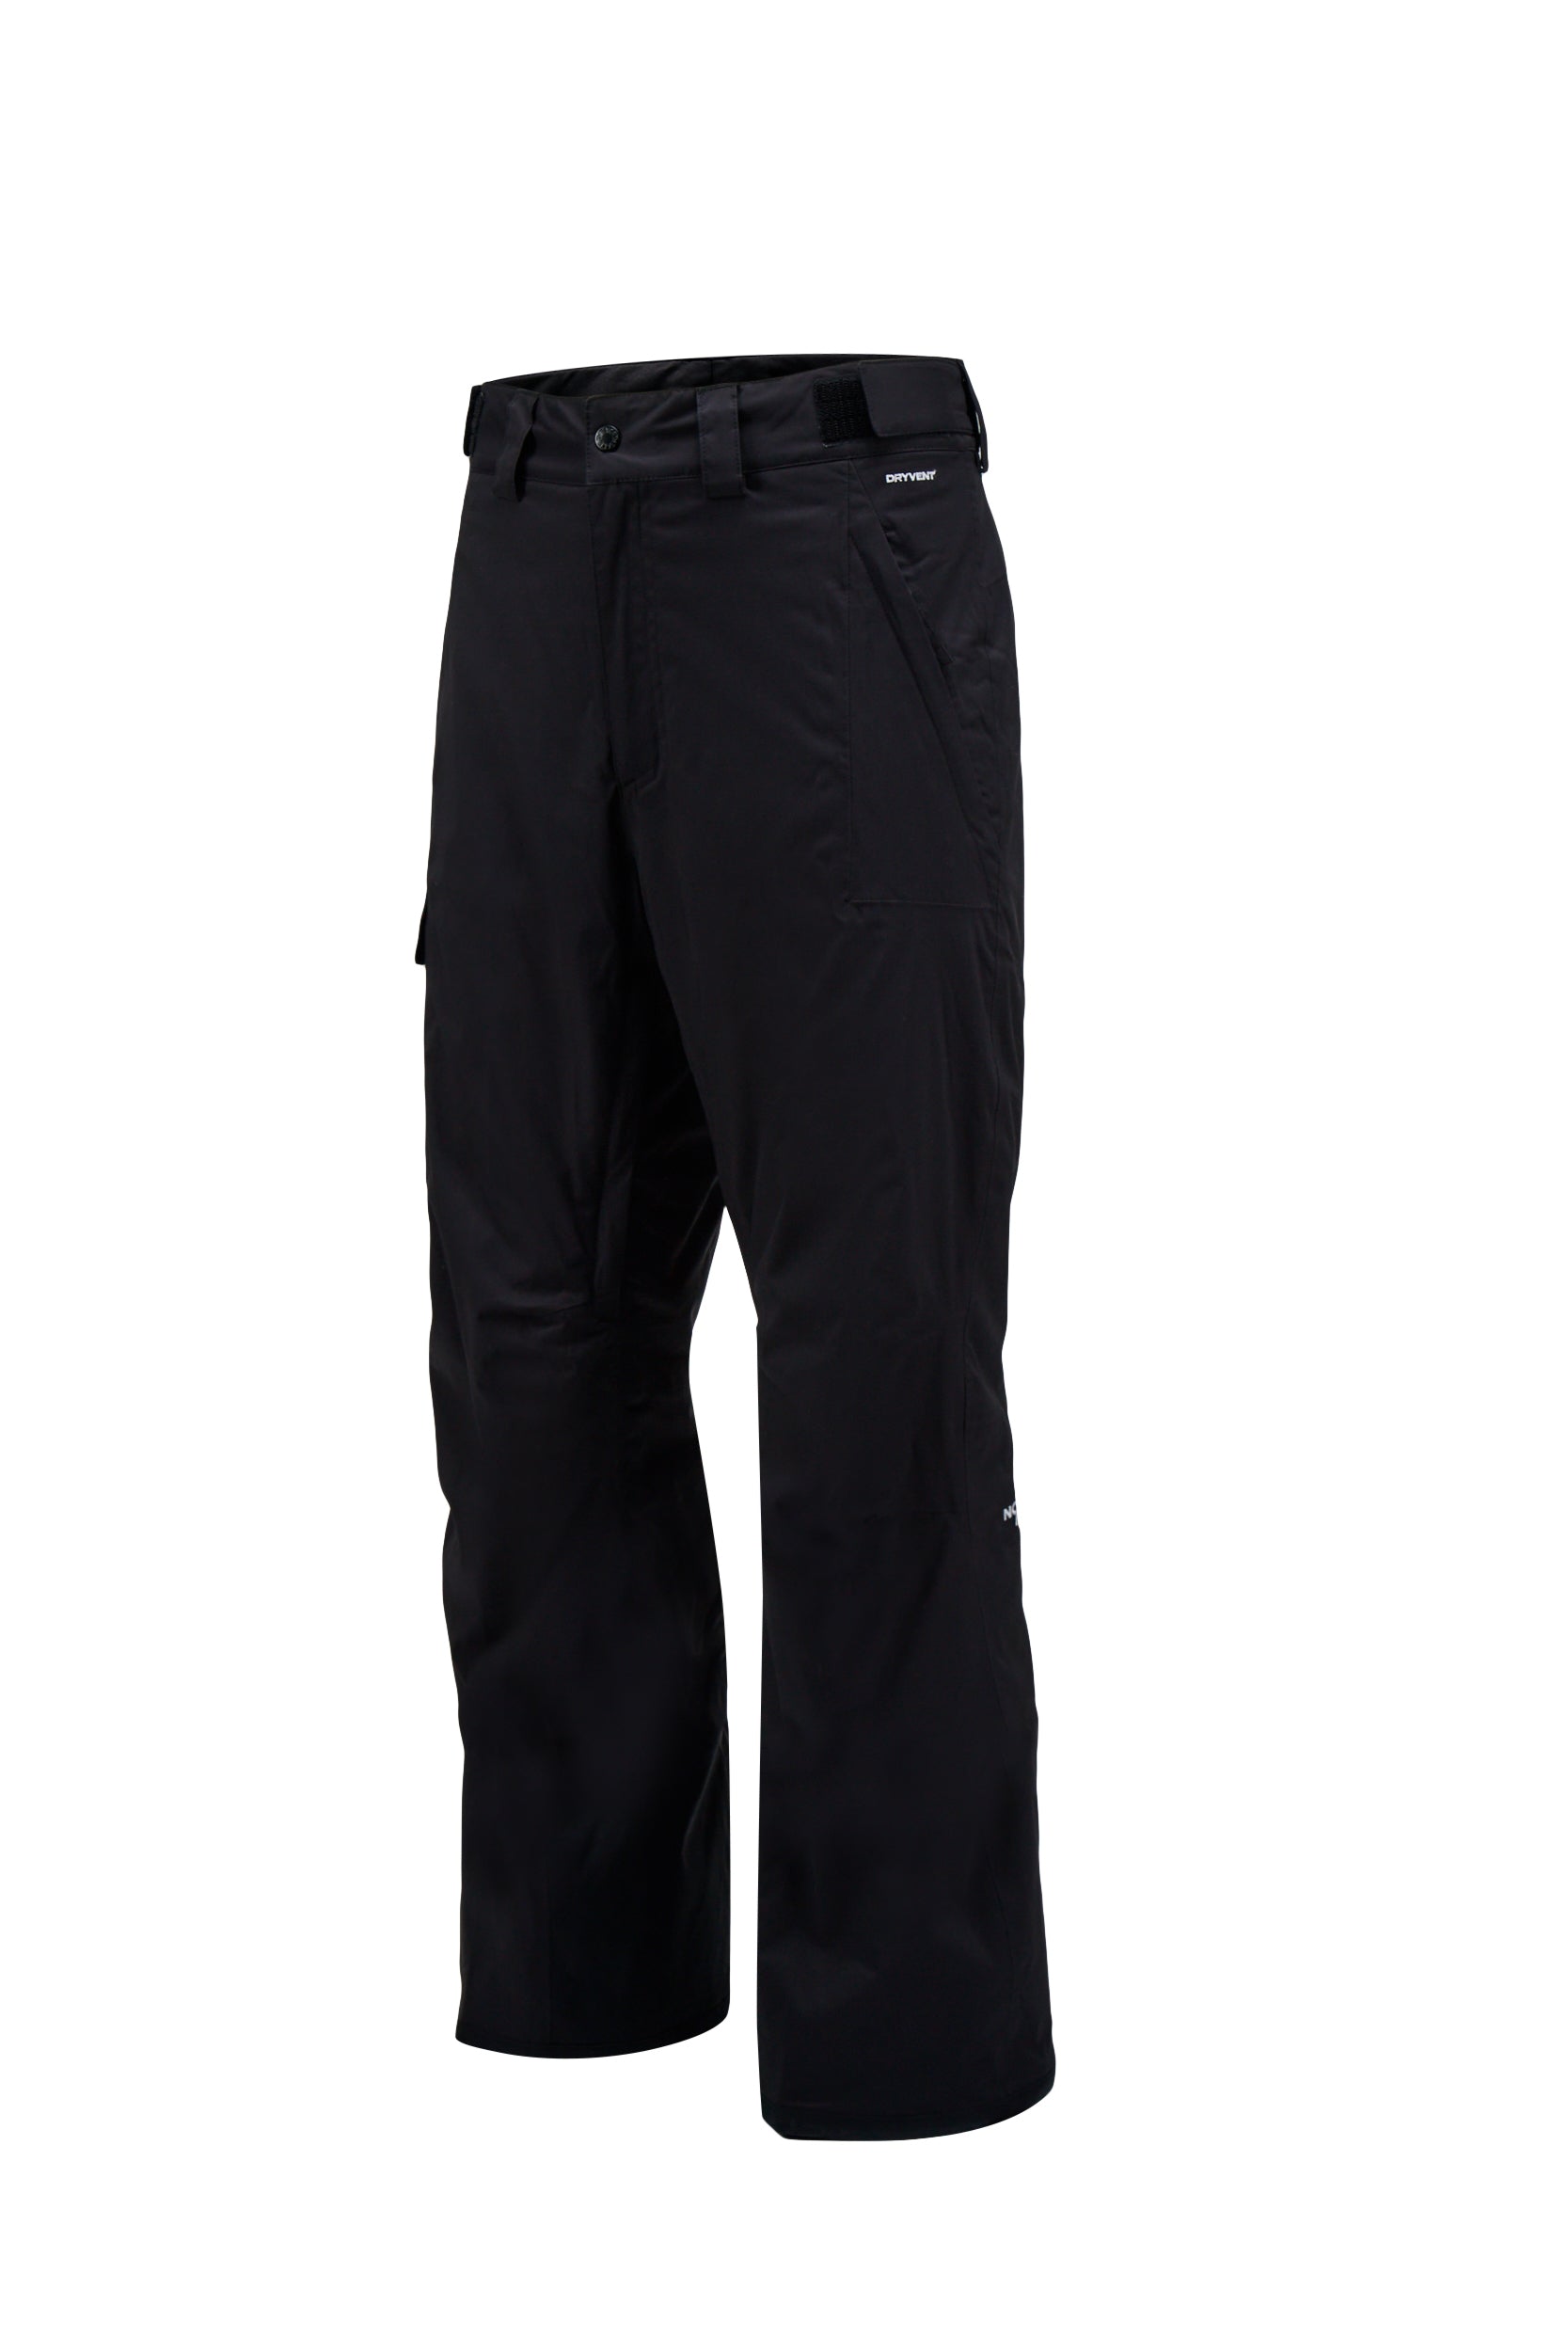 THE NORTH FACE Men's Freedom Insulated Pant, Harbor Blue, Small Regular :  : Clothing, Shoes & Accessories